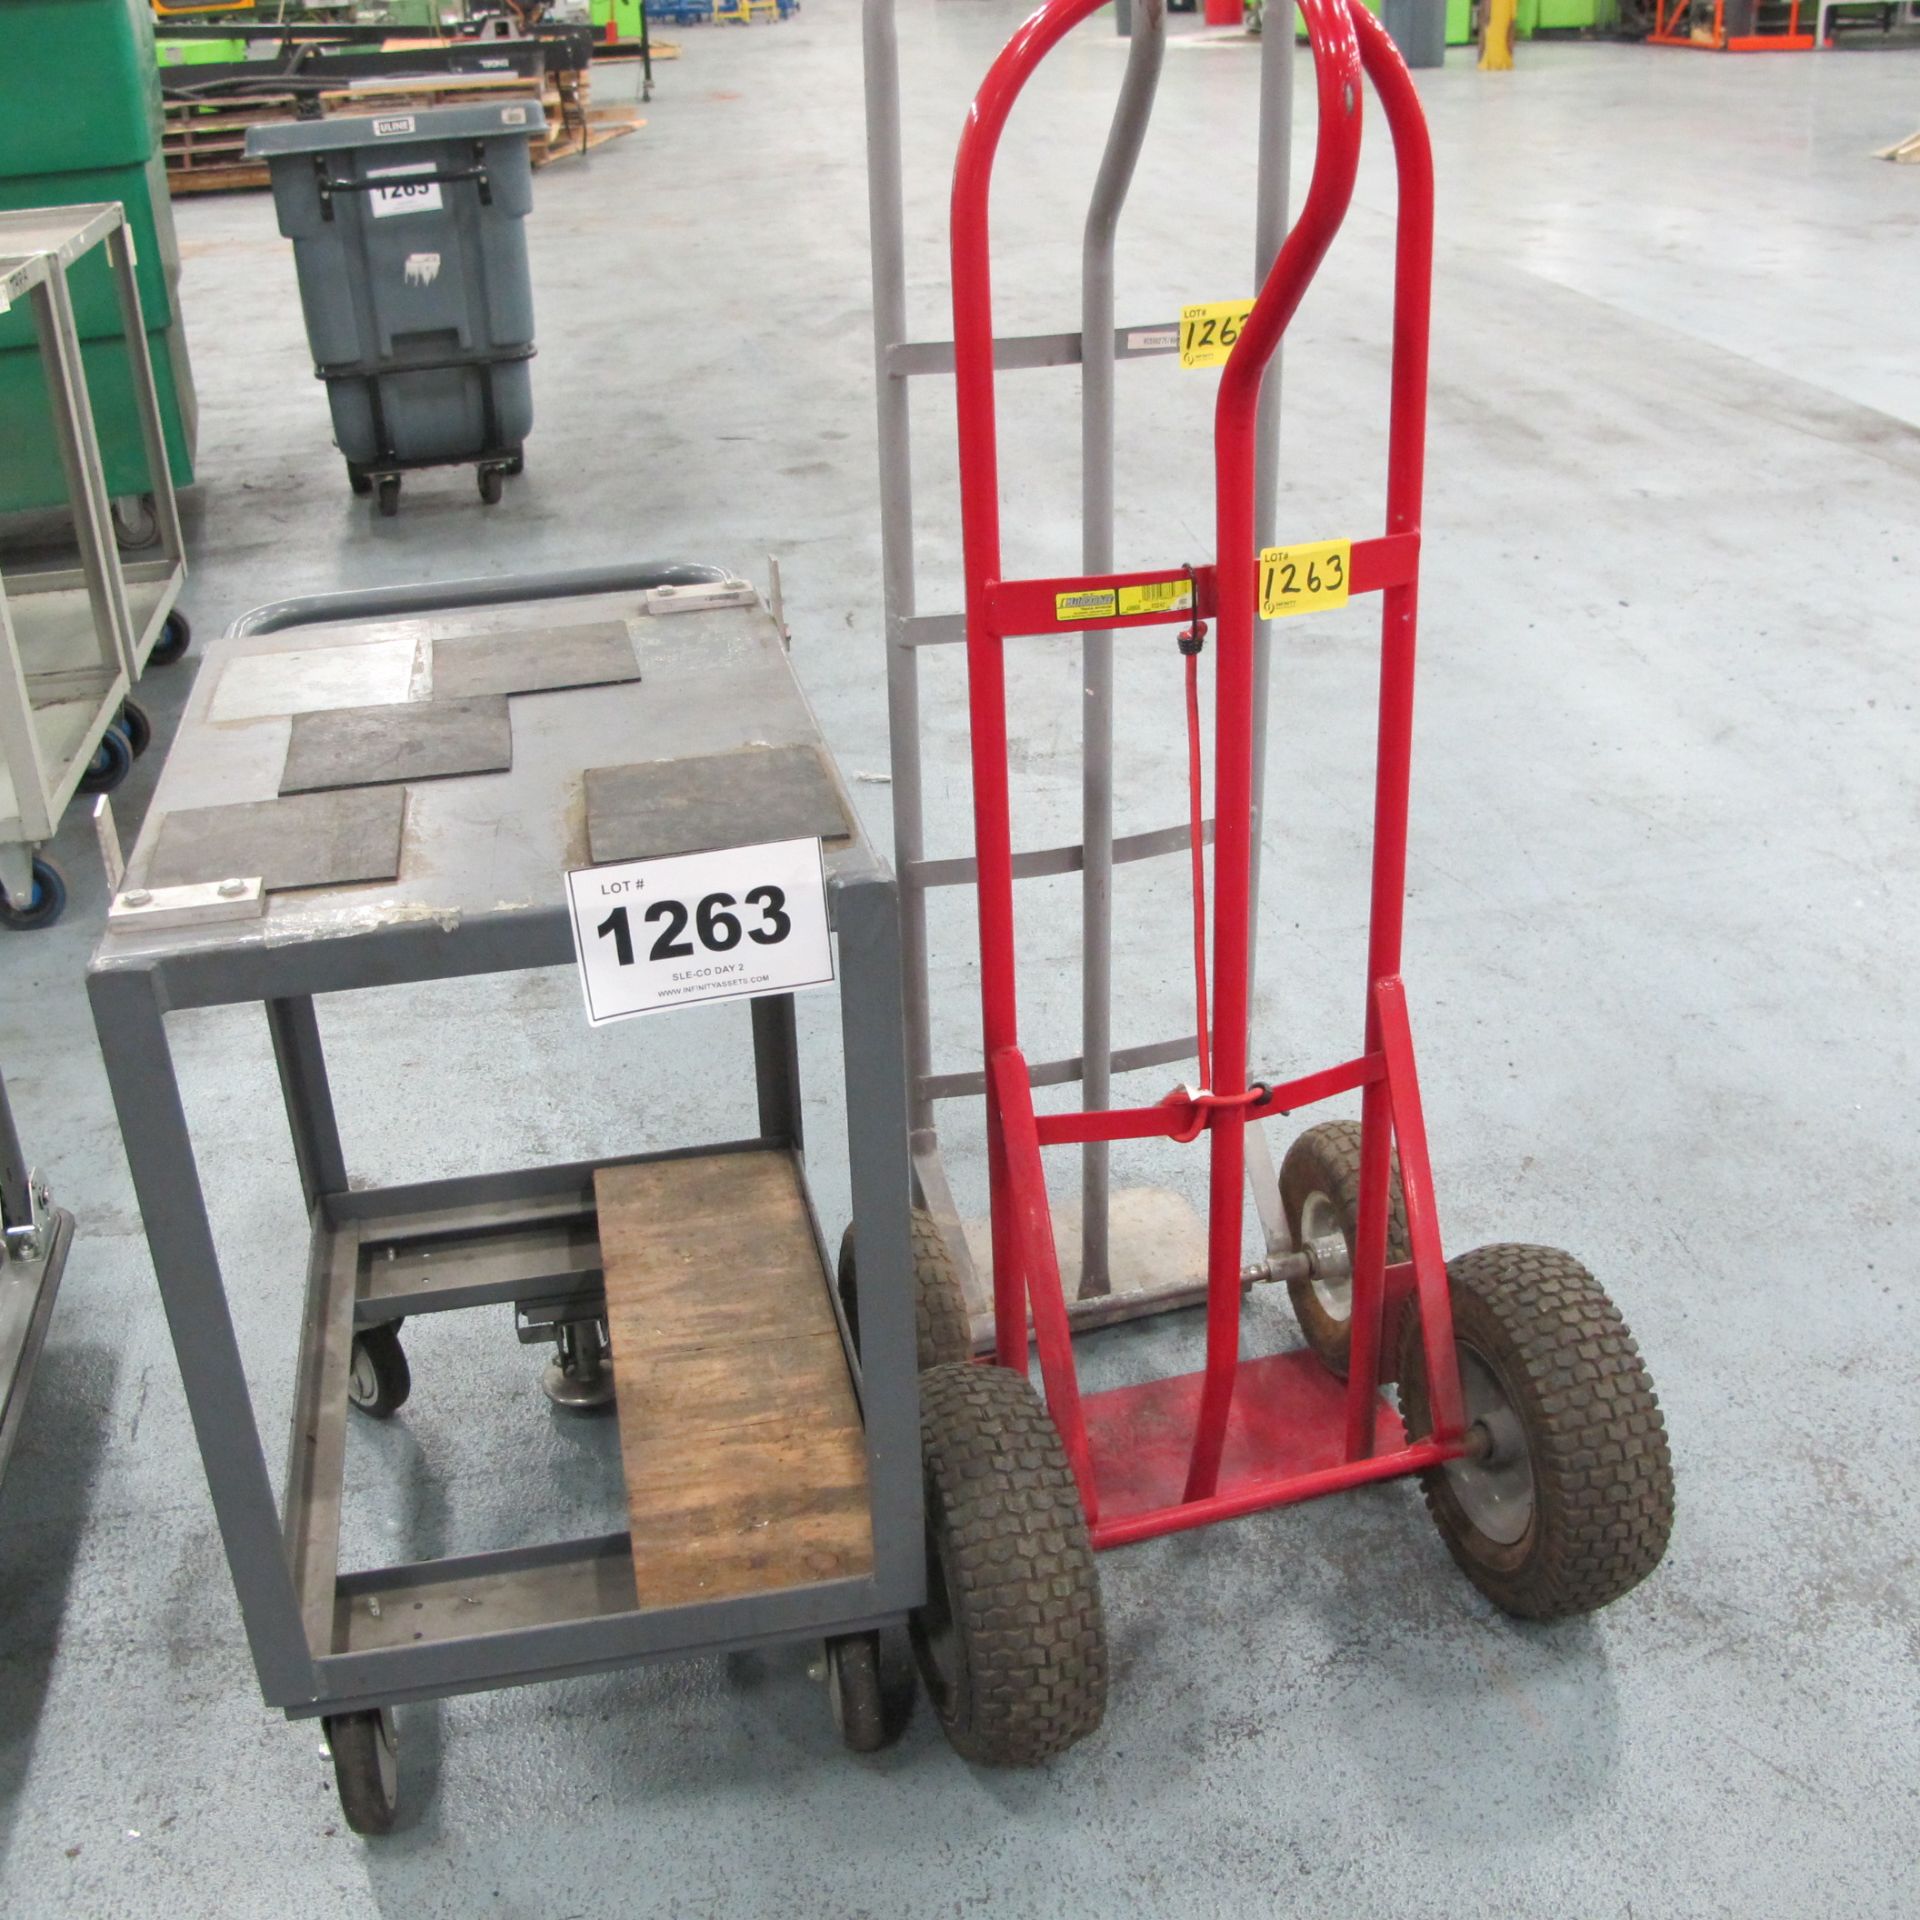 LOT - 2 WHEEL DOLLIES AND CART